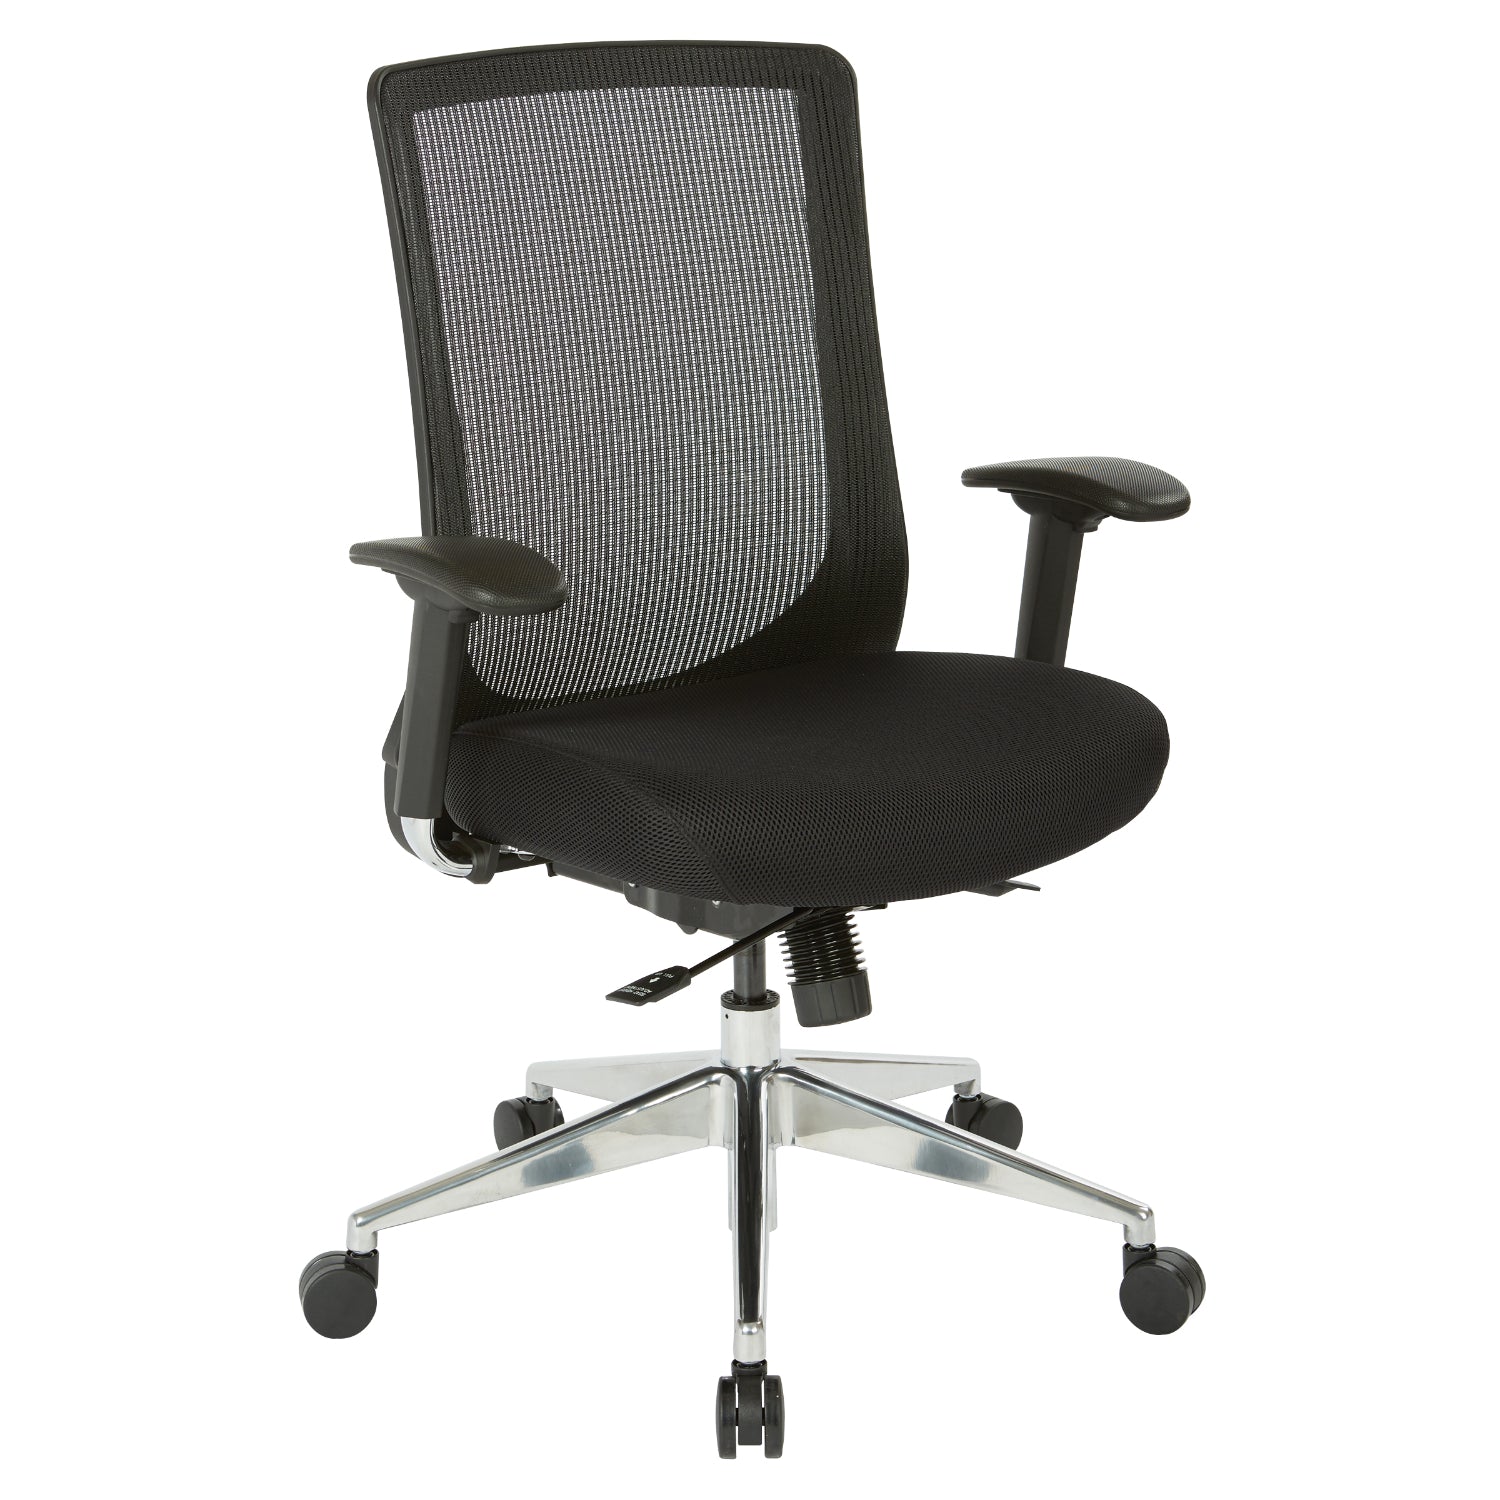 High Back Black Vertical Mesh Chair with Black Fabric Seat, Height Adjustable Arms, Seat Slider, and Angled Chrome Base